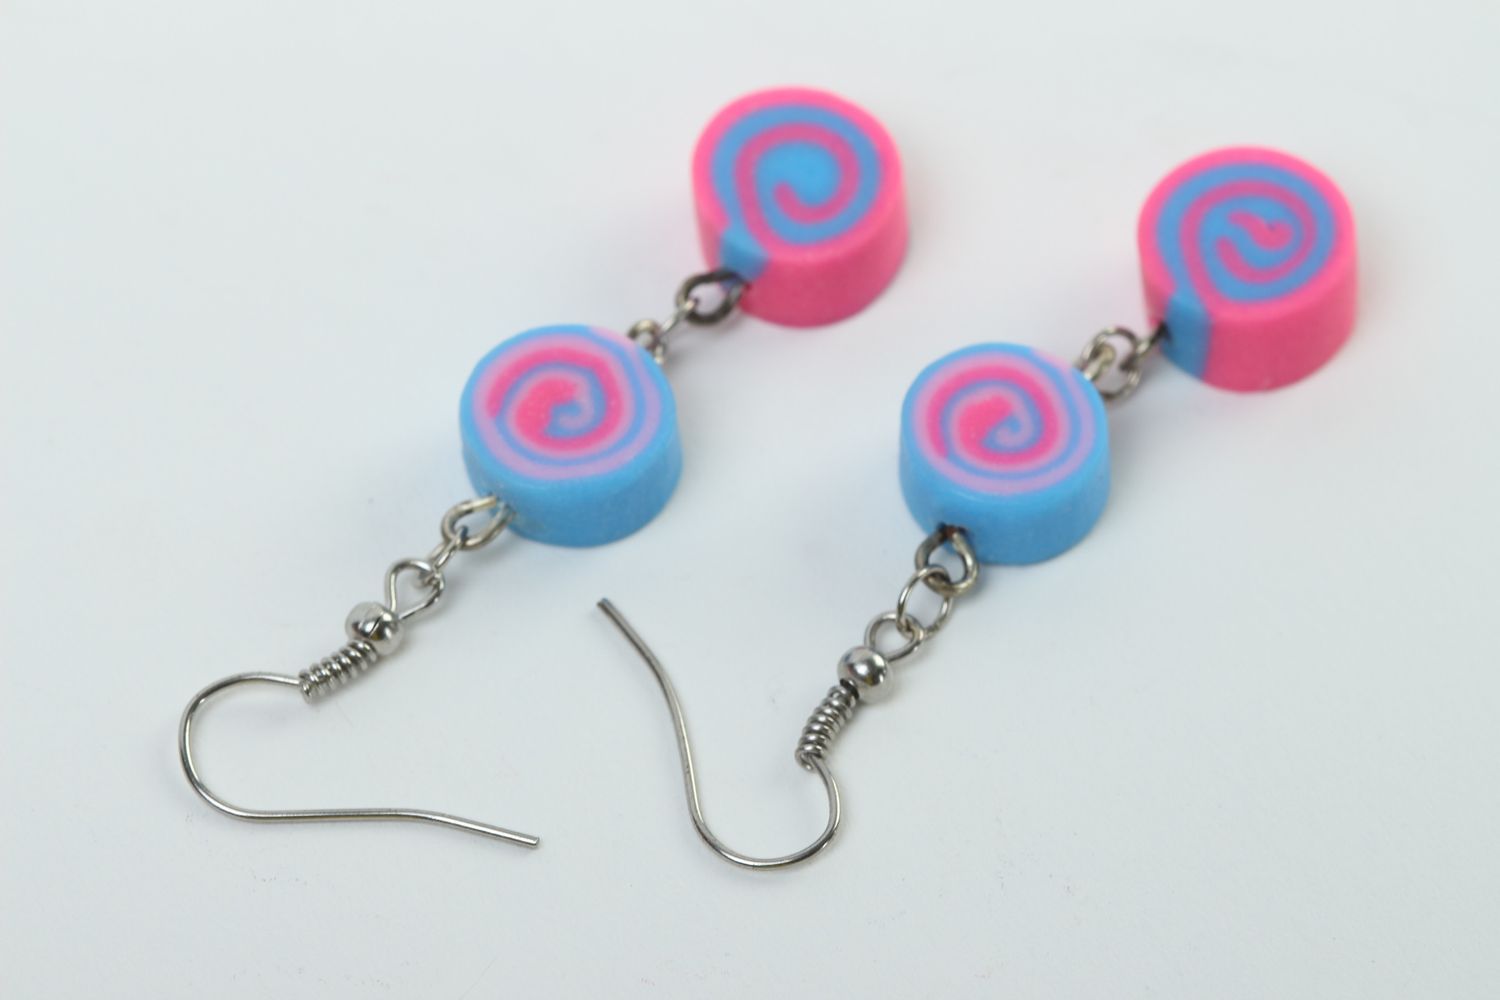 Handmade bright cute earrings designer polymer clay jewelry earrings with charms photo 4